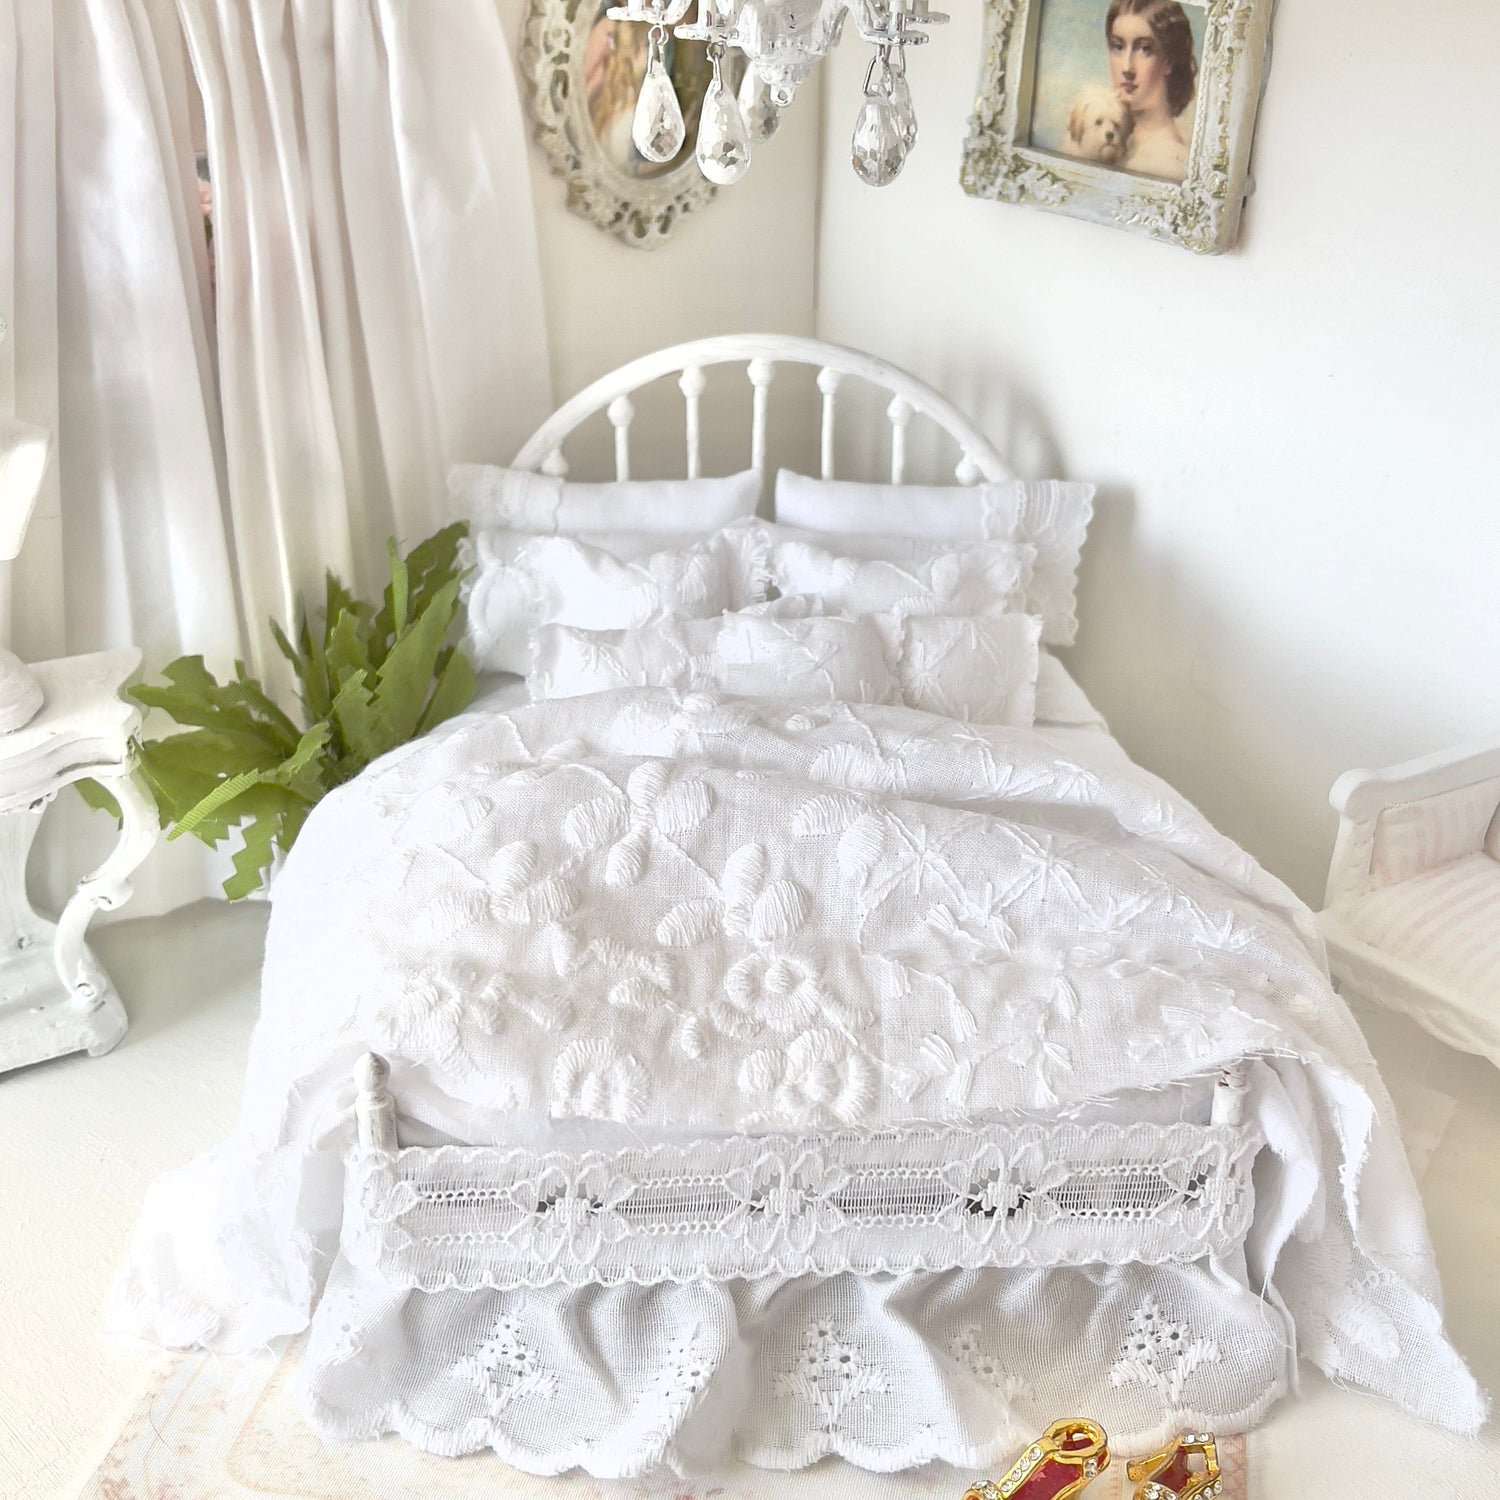 Chantallena Doll House Lexie | White Cotton with Embroidered and Eyelet Lace Accents